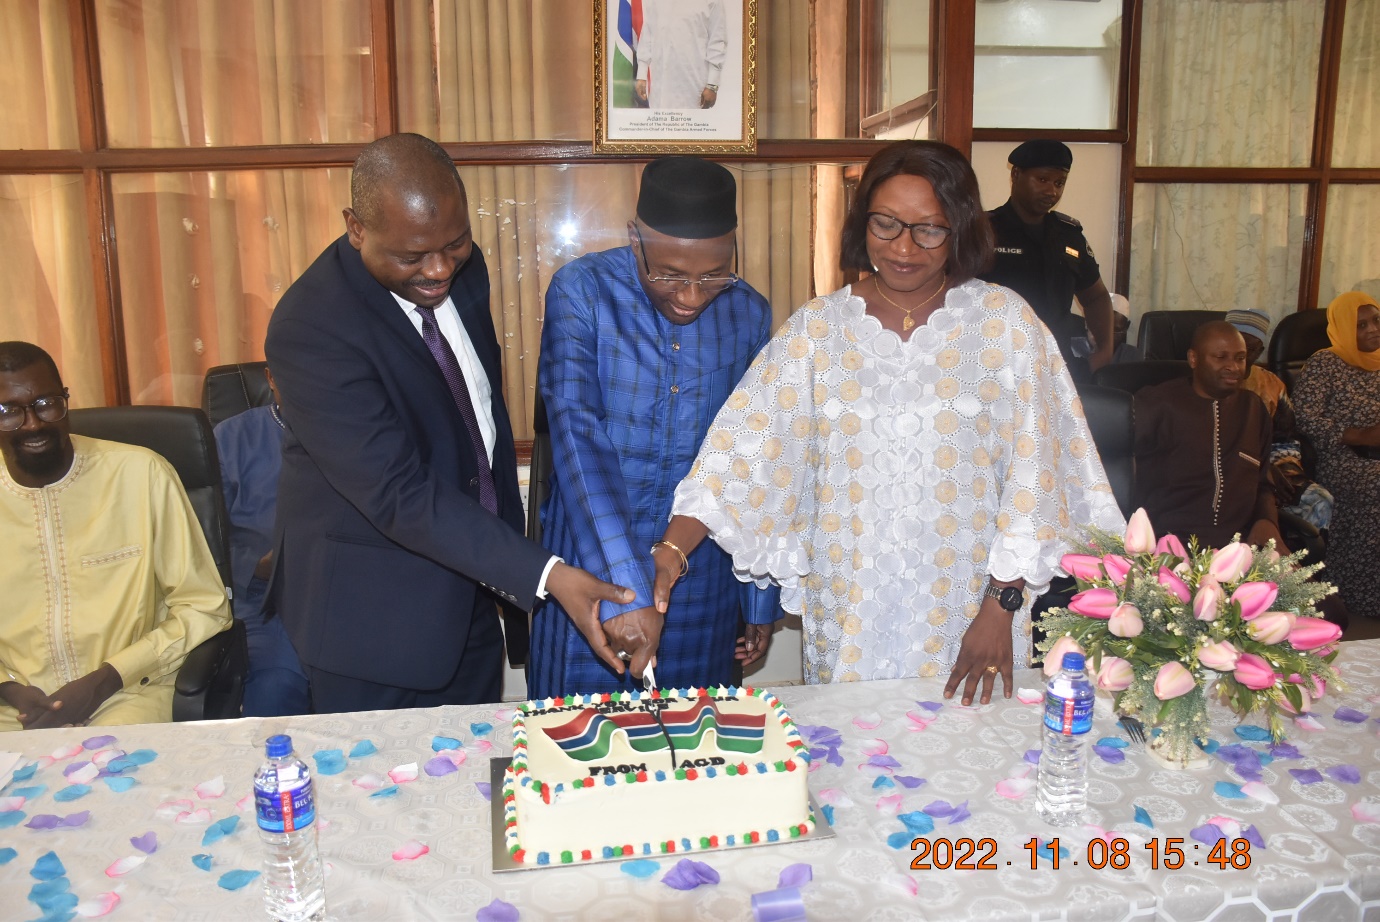 THE ACCOUNTANT GENERAL’S DEPARTMENT BADE FAREWELL TO THEIR FORMER BOSS